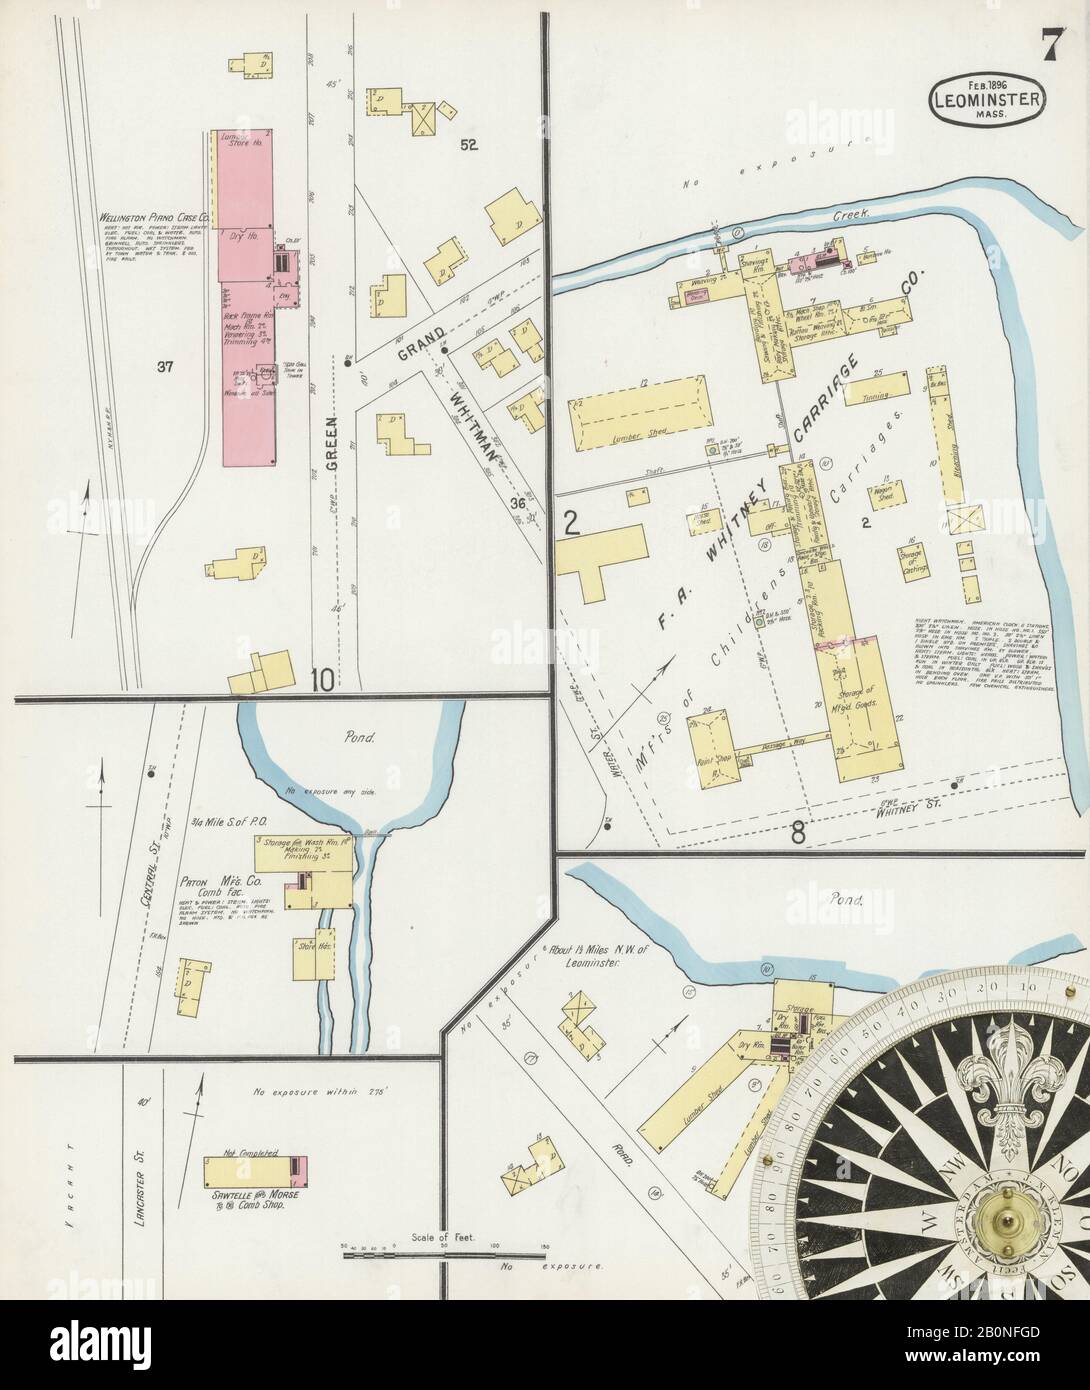 Image 7 of Sanborn Fire Insurance Map from Leominster, Worcester County, Massachusetts. Feb 1896. 11 Sheet(s), America, street map with a Nineteenth Century compass Stock Photo